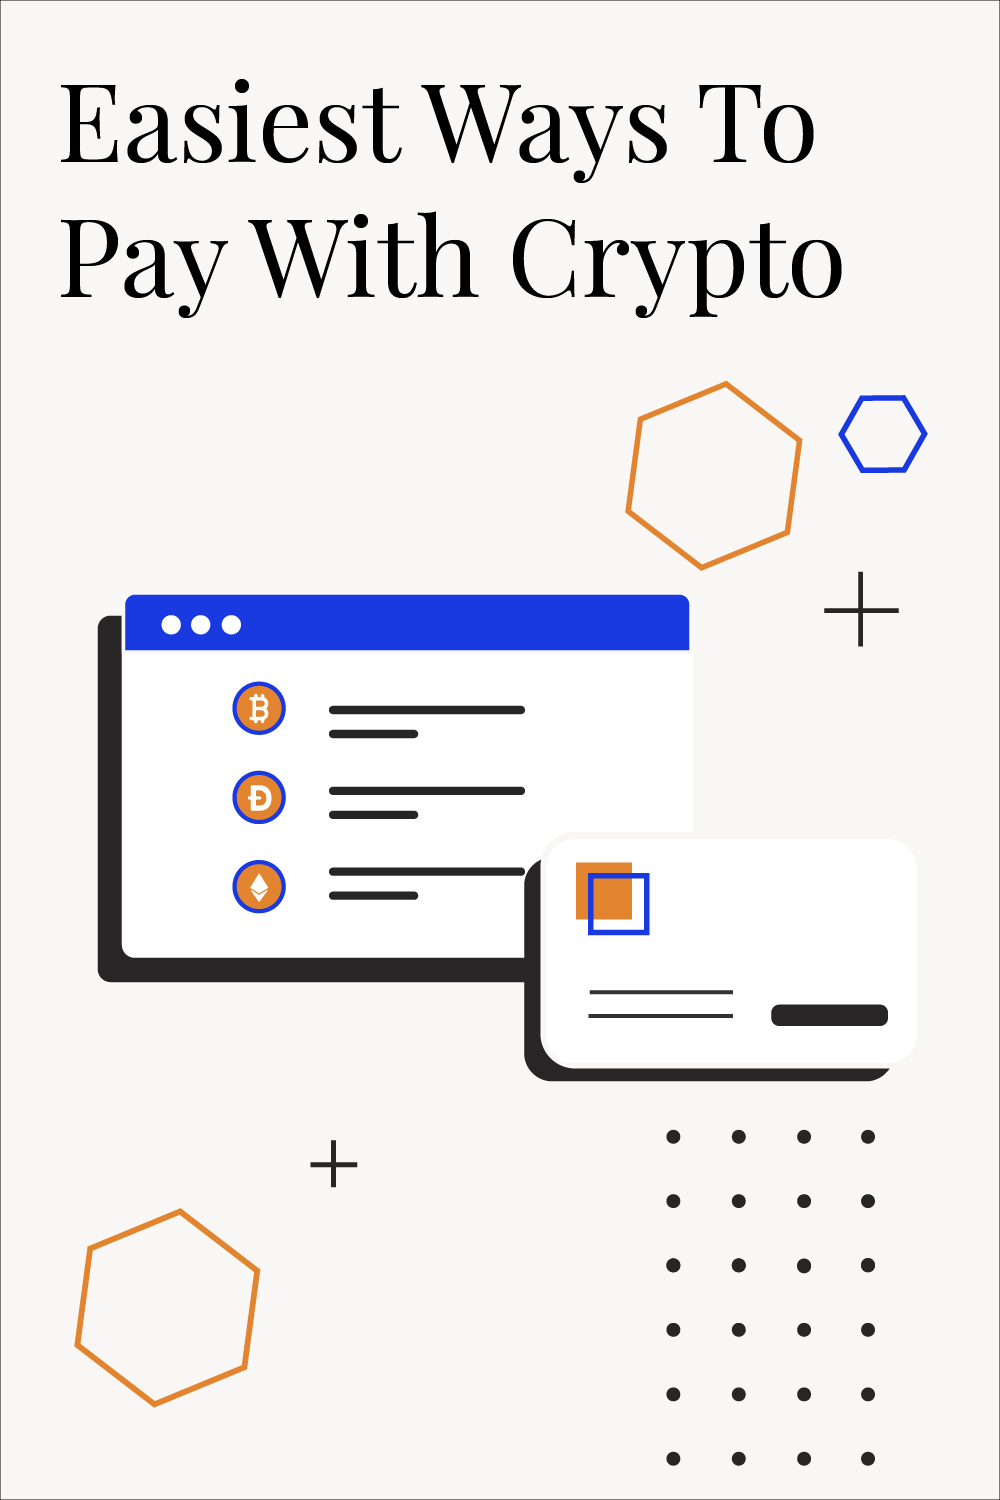 5 Easiest Ways To Pay With Crypto